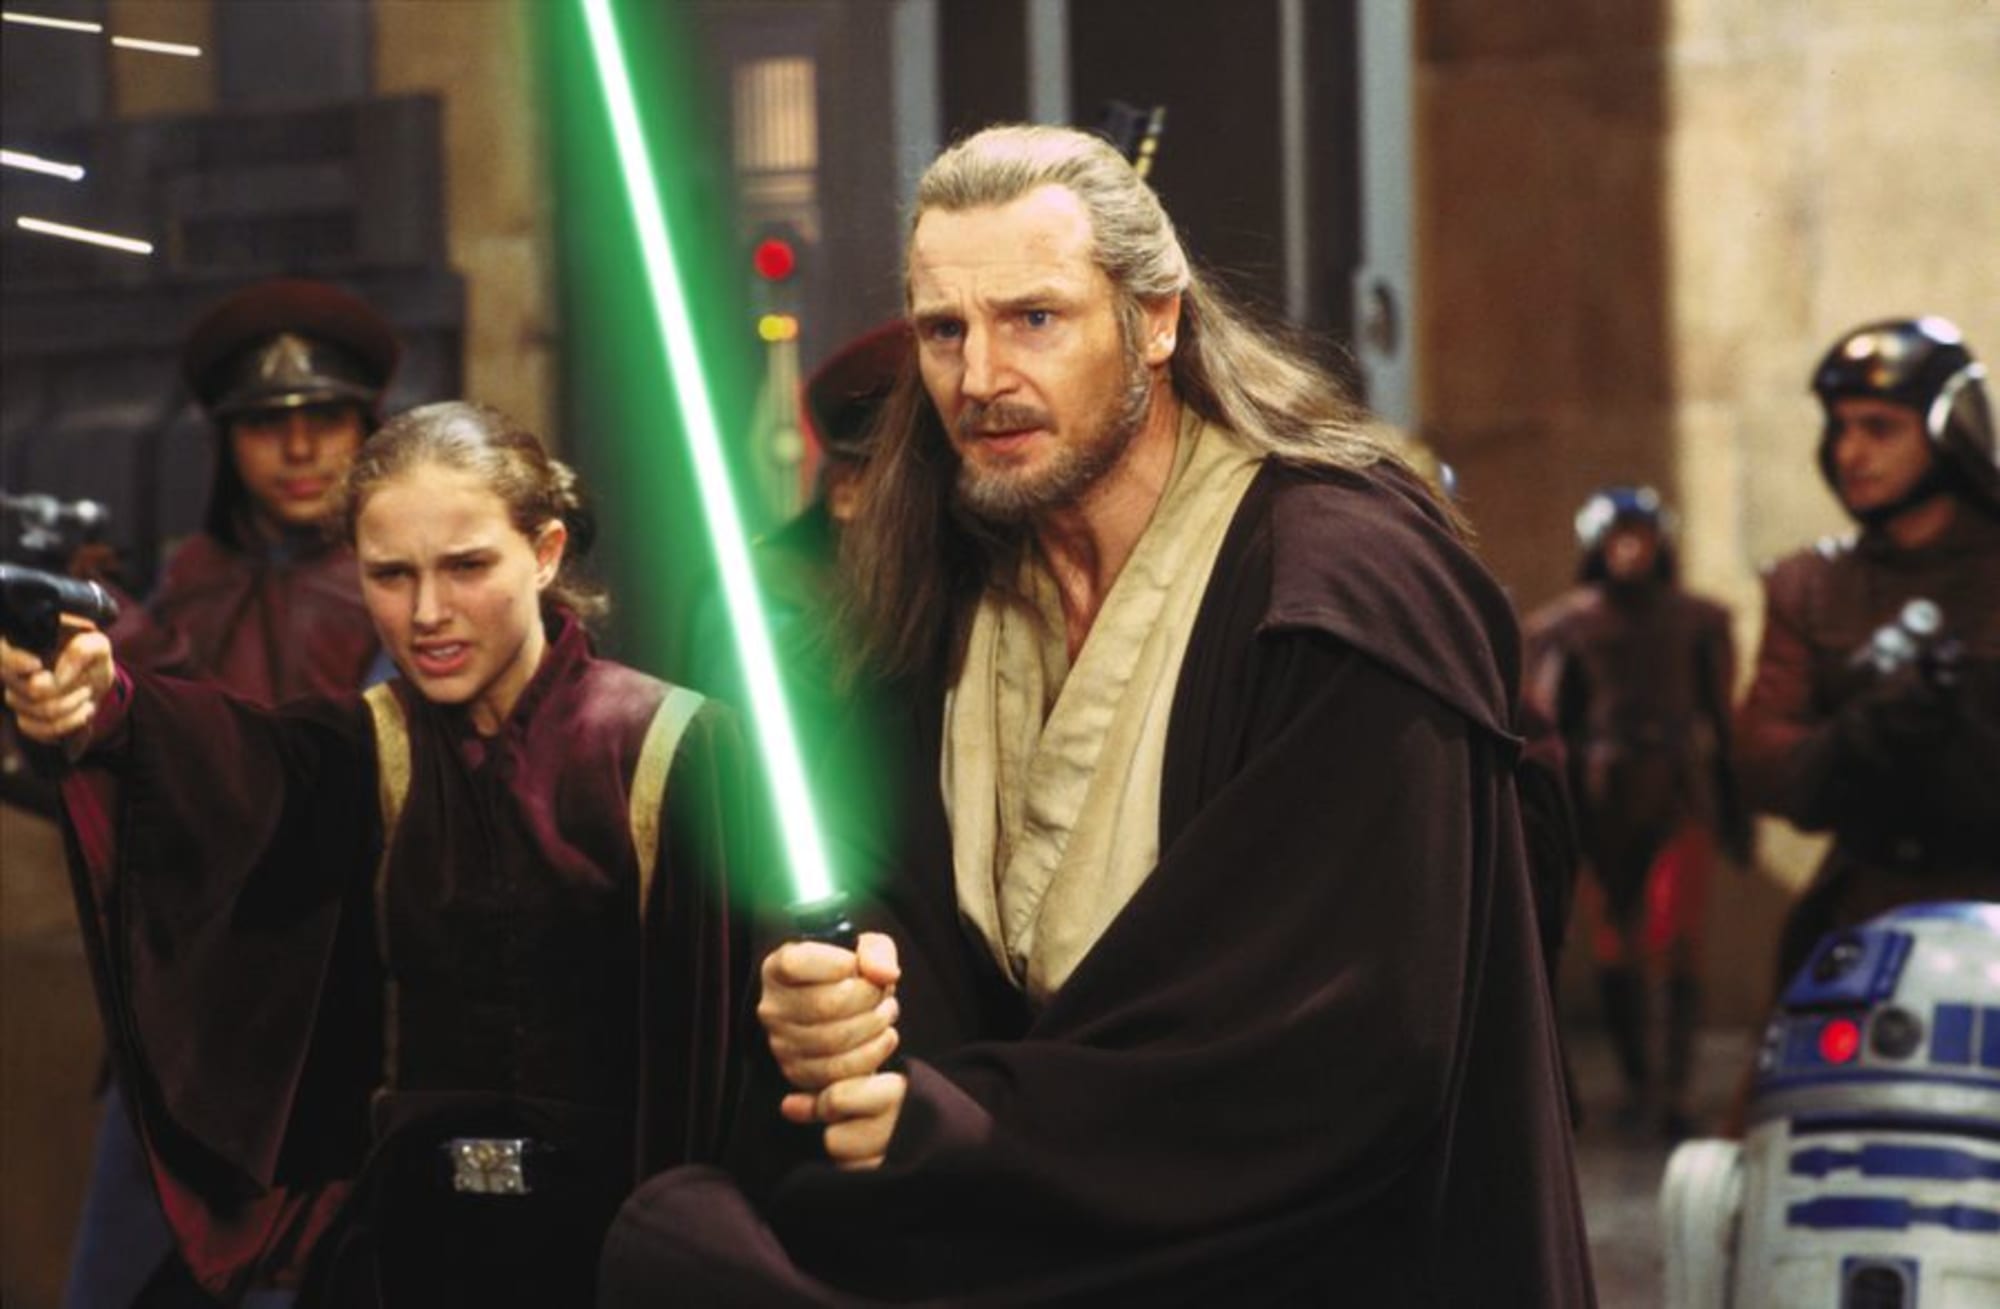 IGN on X: Liam Neeson was asked if he'd appear in a spin-off starring his  character Qui-Gon Jinn, quickly answering no and that There's so many  spin-offs of Star Wars. It's diluting